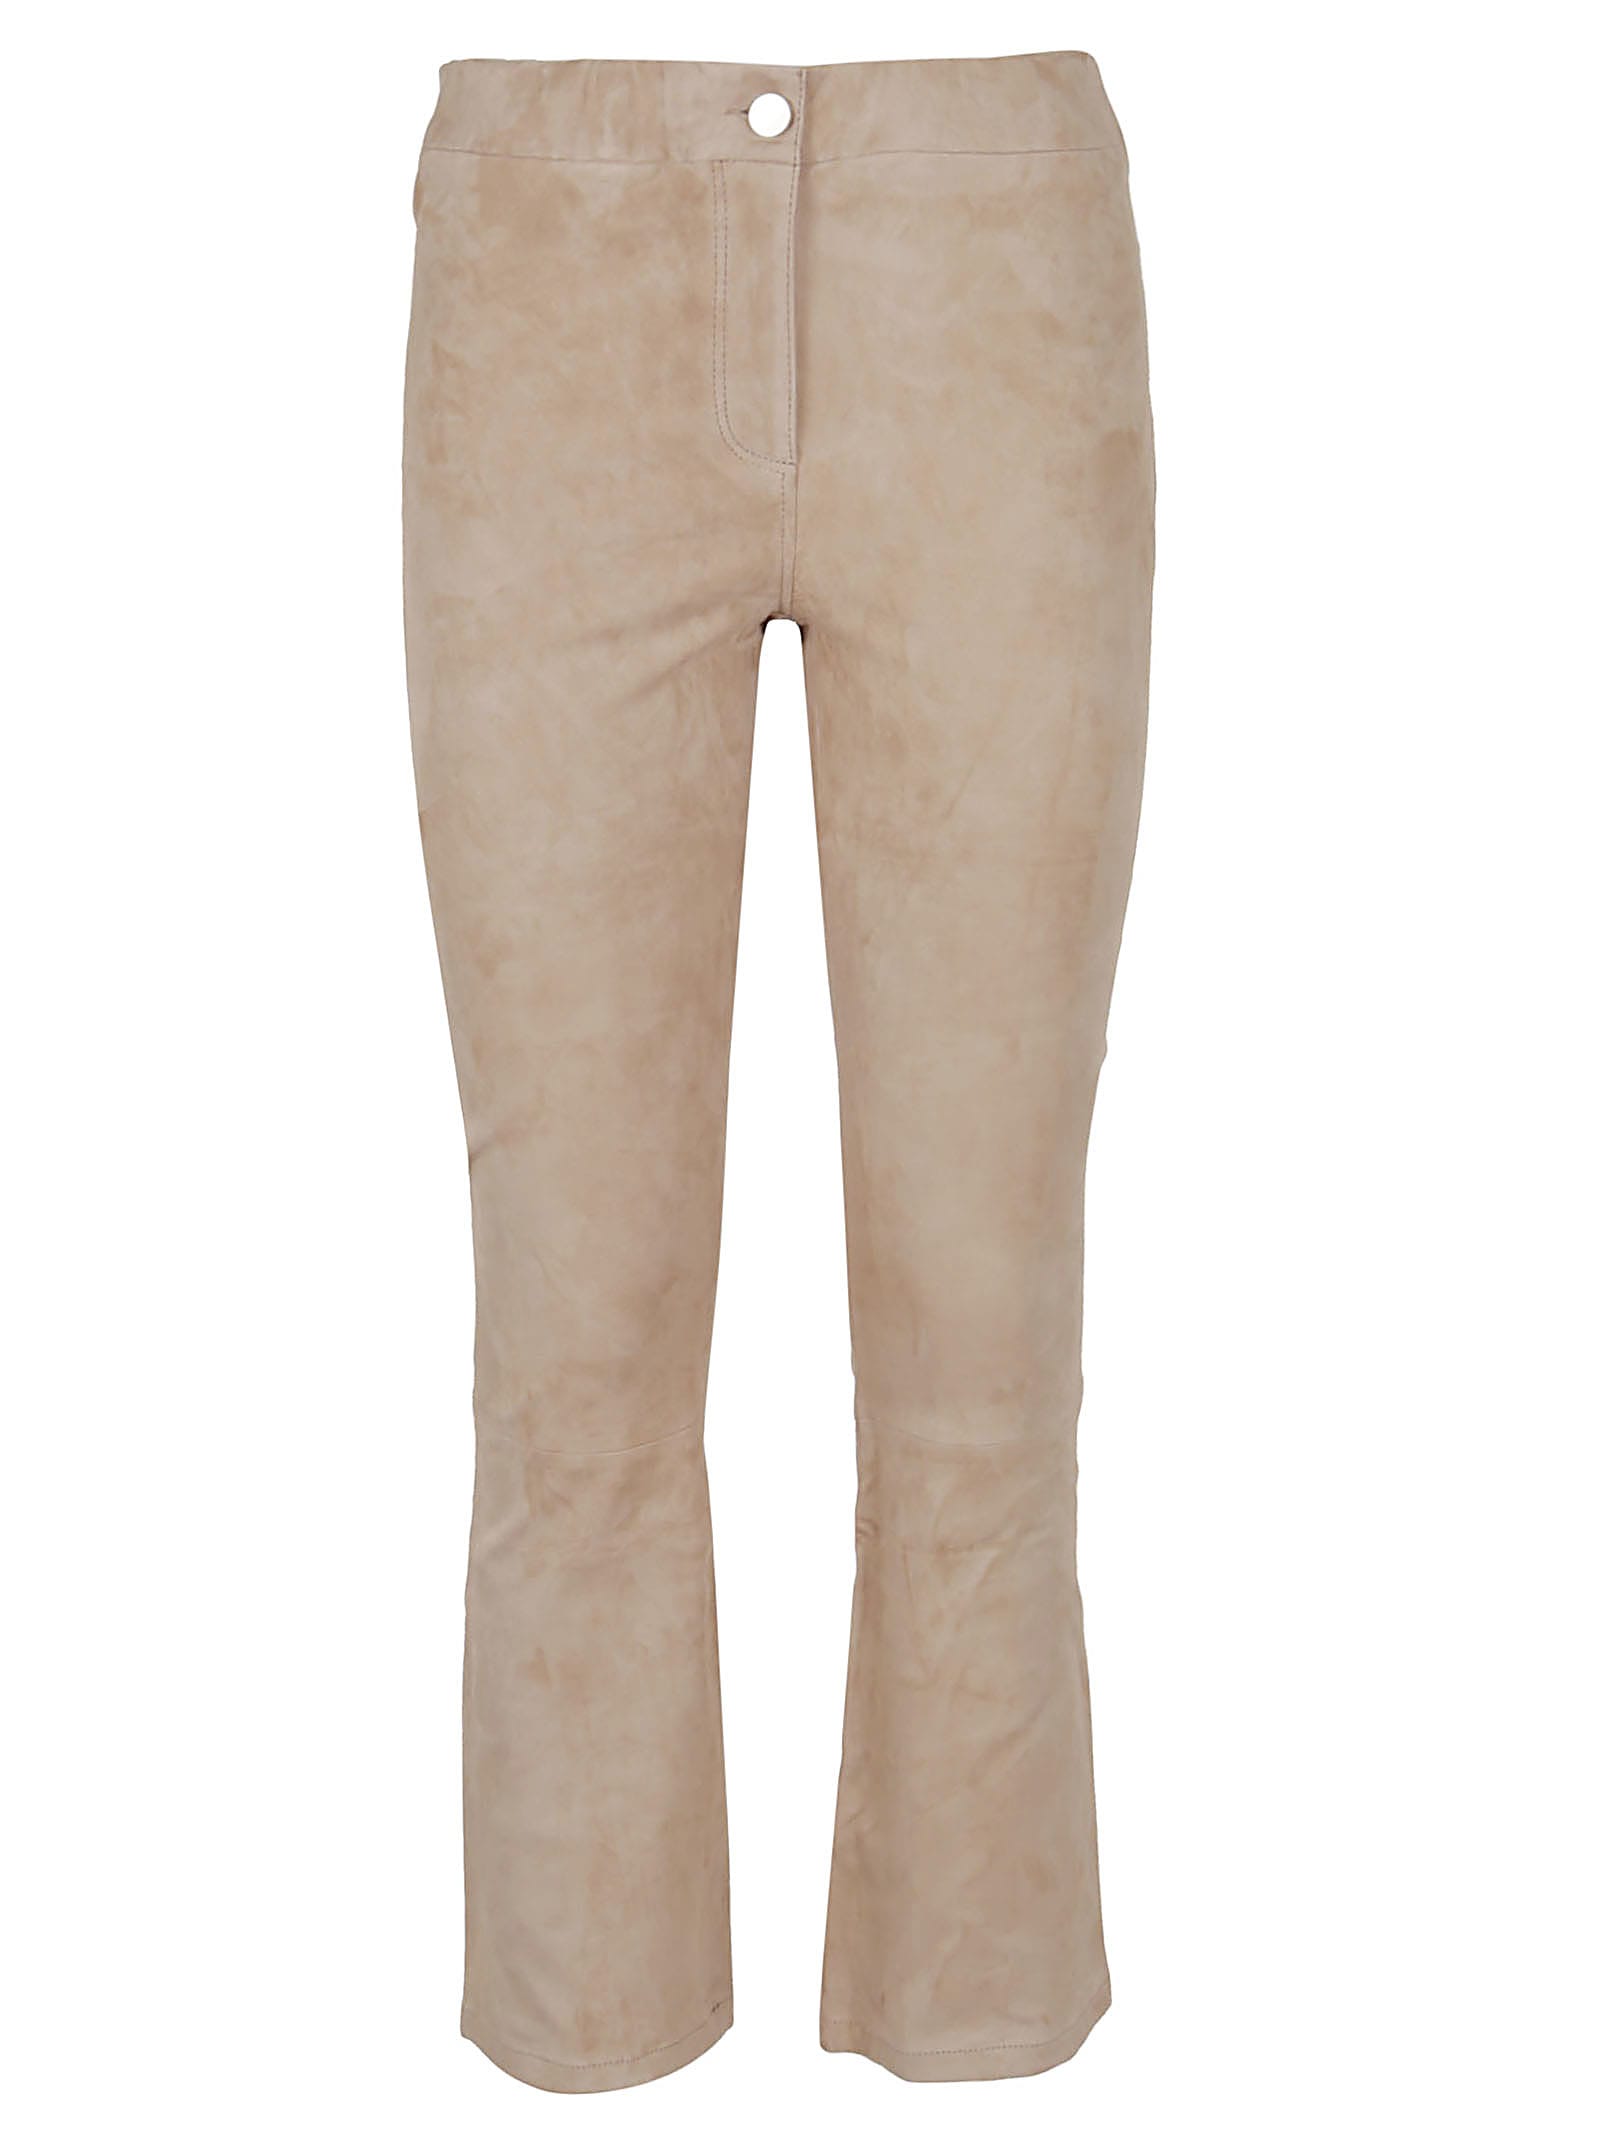 ARMA Lively Stretch Suede Pants